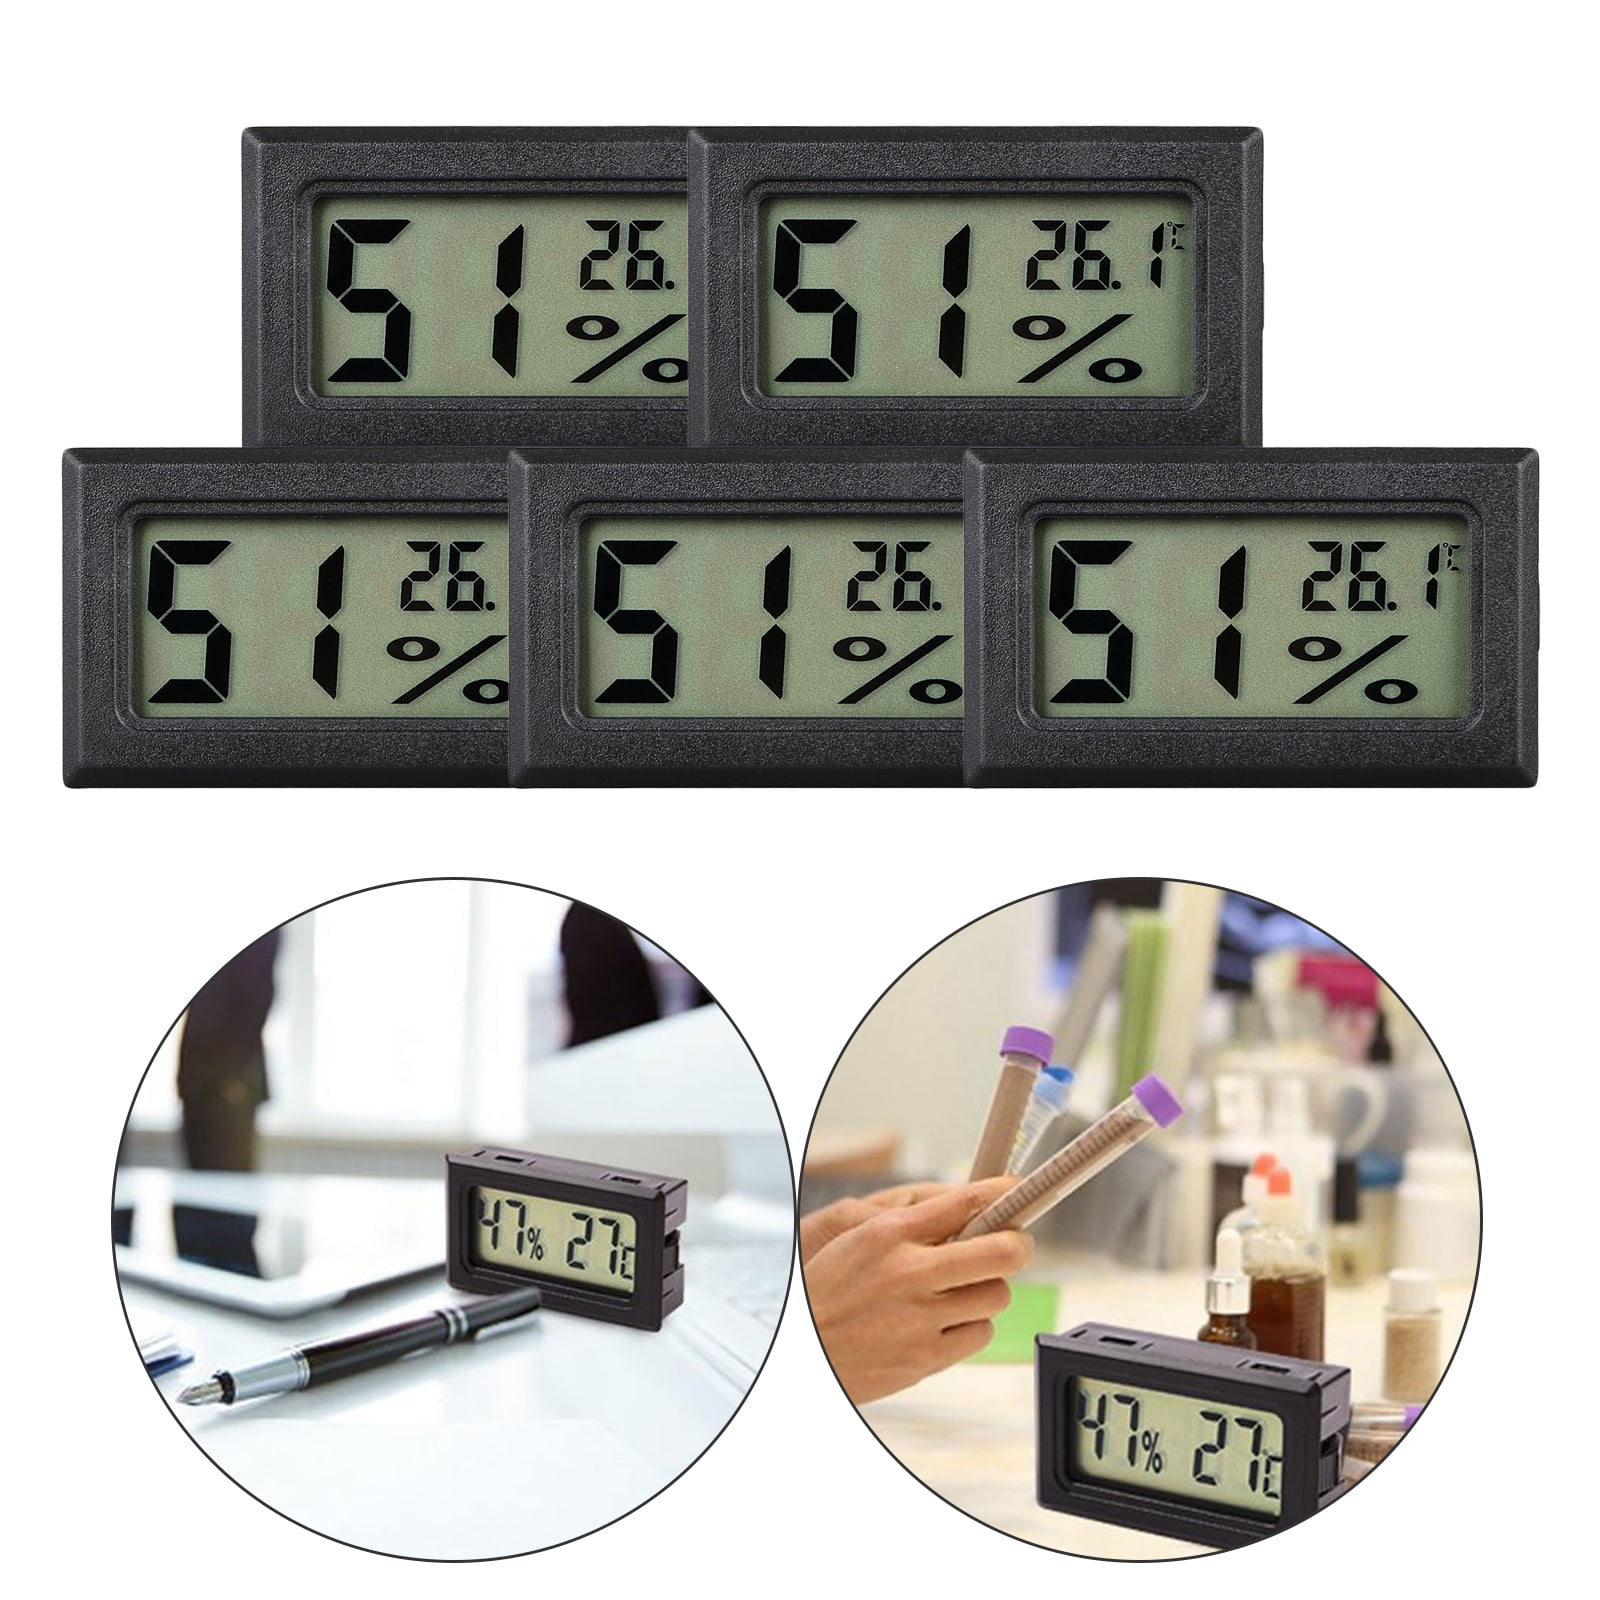 banapoy LCD Thermometer Large LCD Display Digital Thermometer Hygrometer with The Backstand Design Office for Home Indoor Room Thermometer 